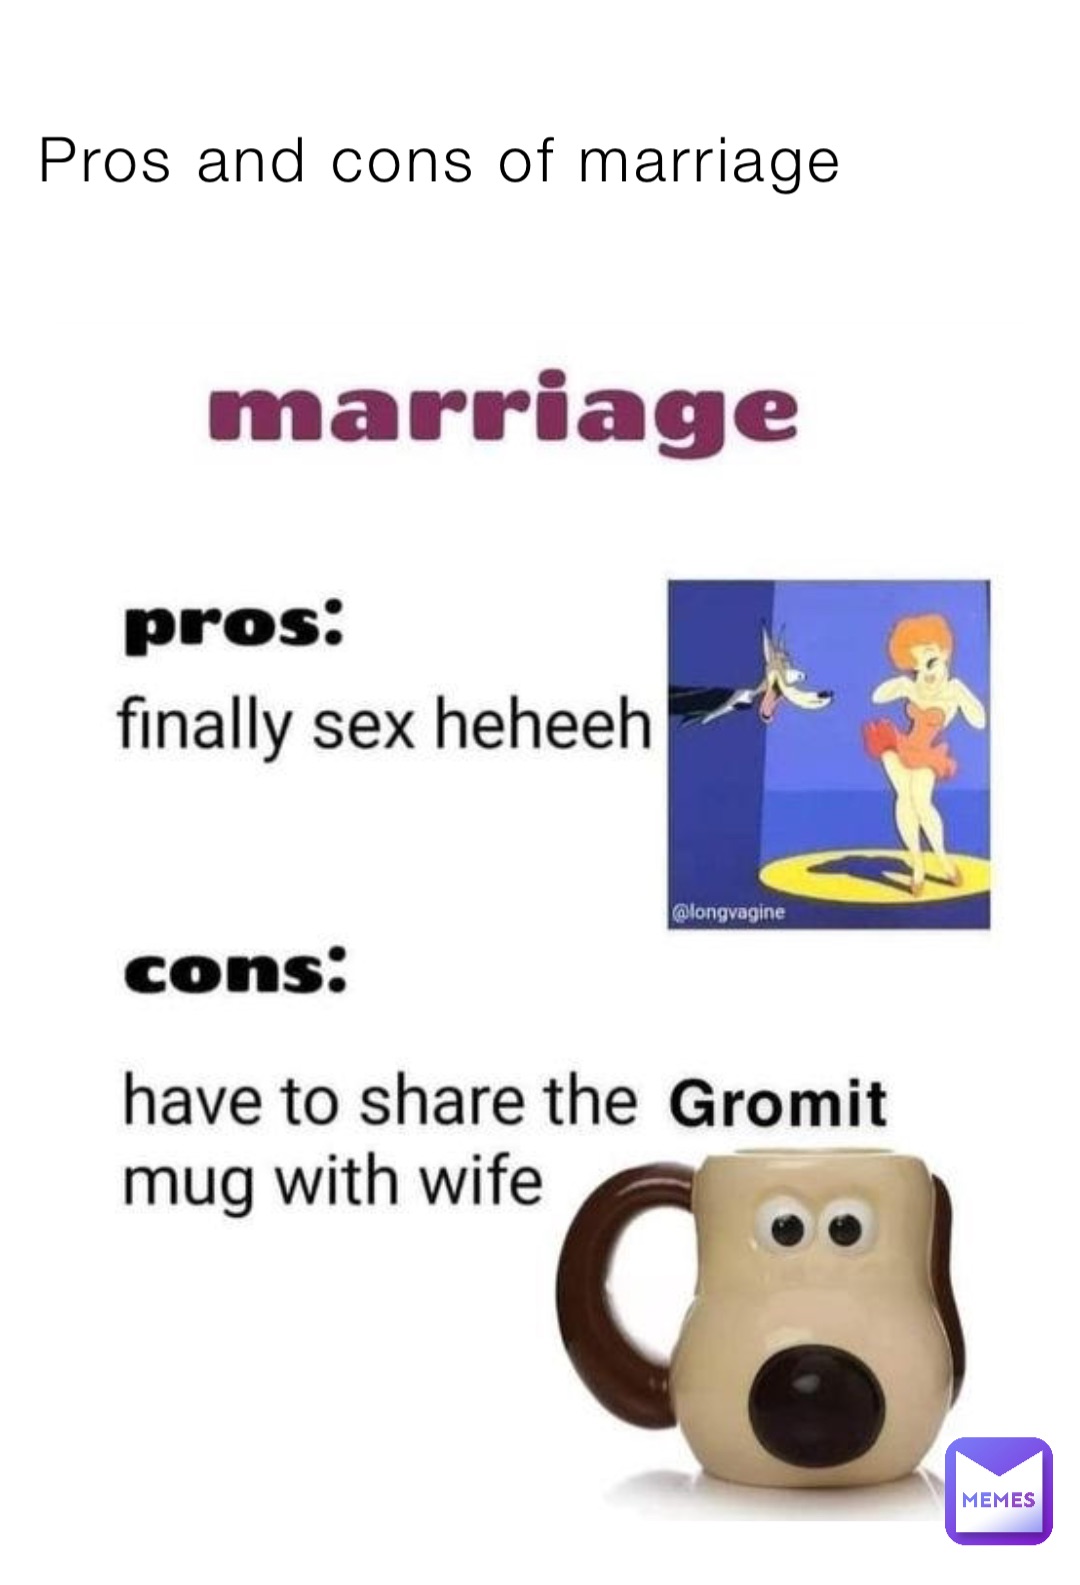 Pros and cons of marriage